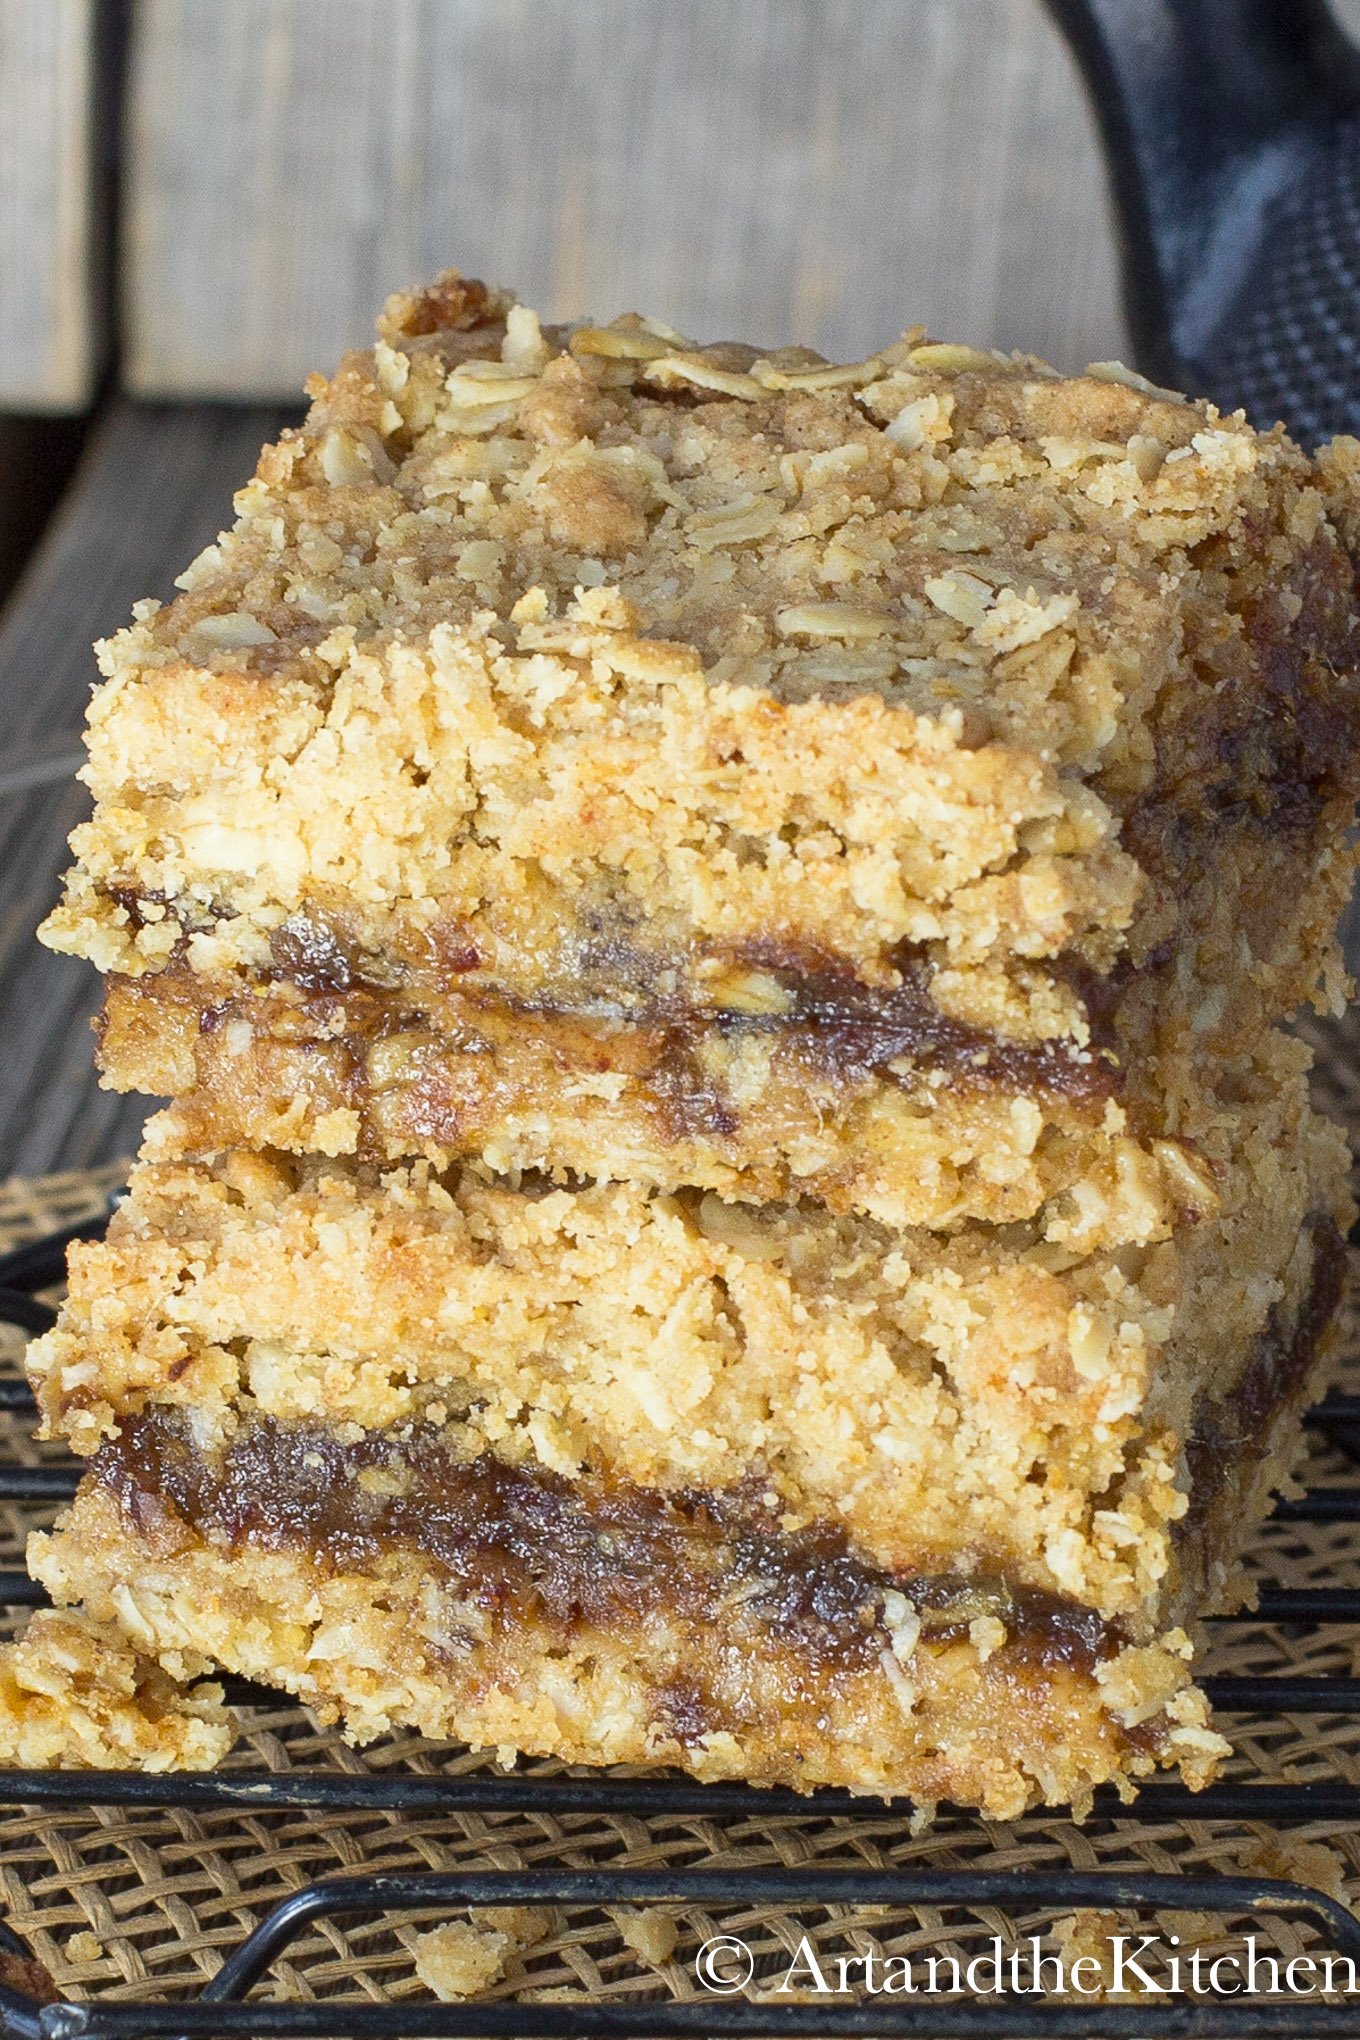 A stack of two date squares on black cooling rack.